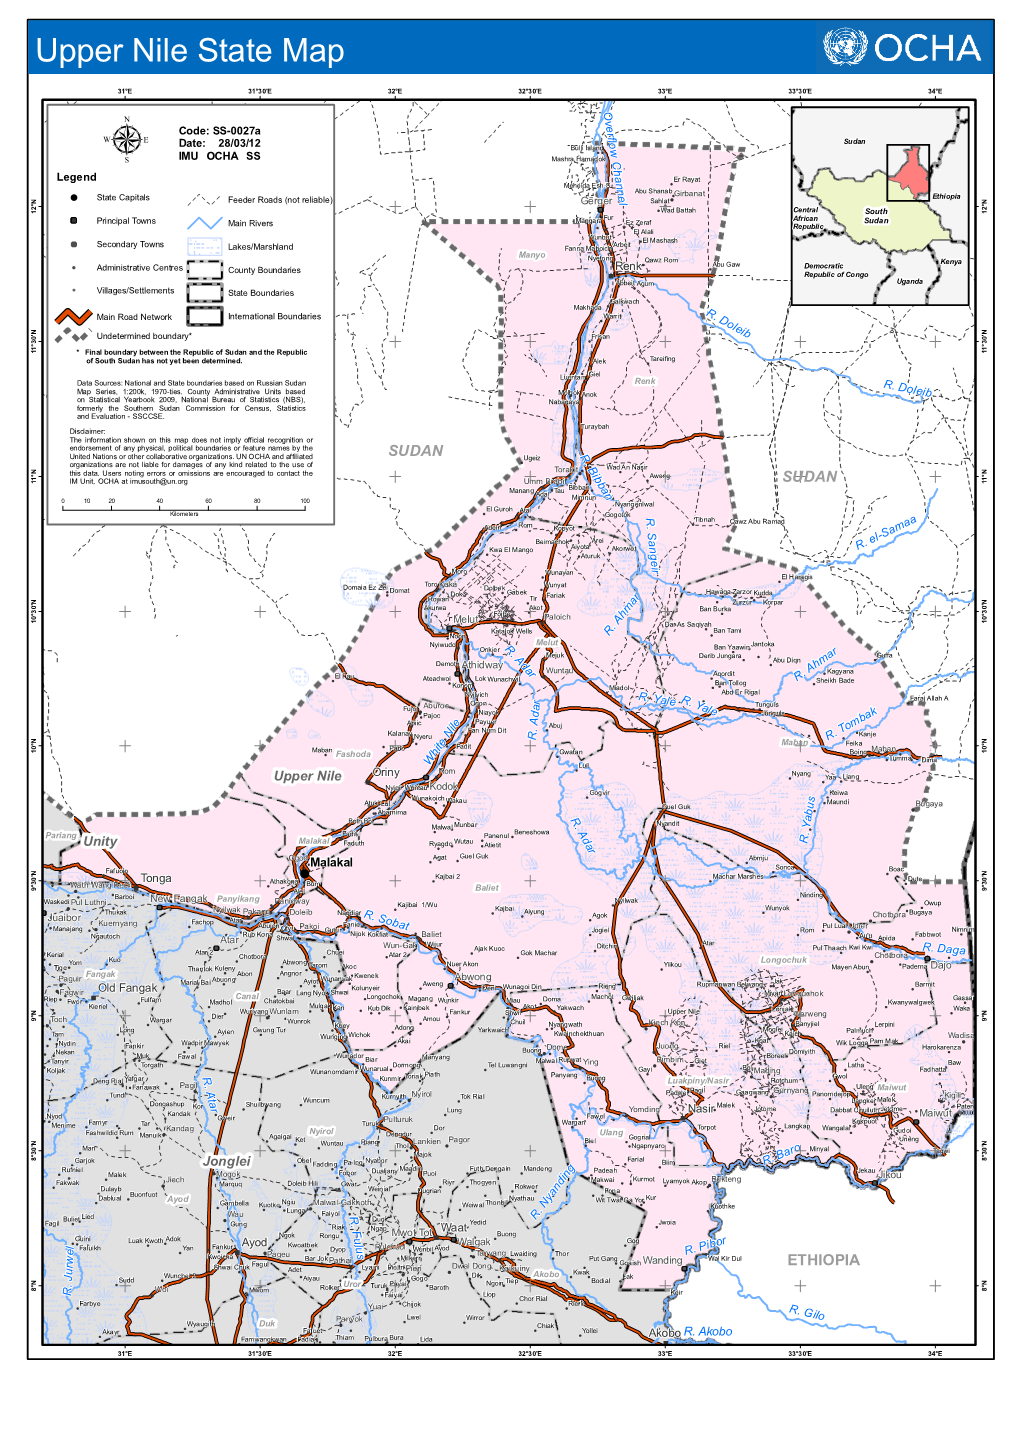 Upper Nile State Map